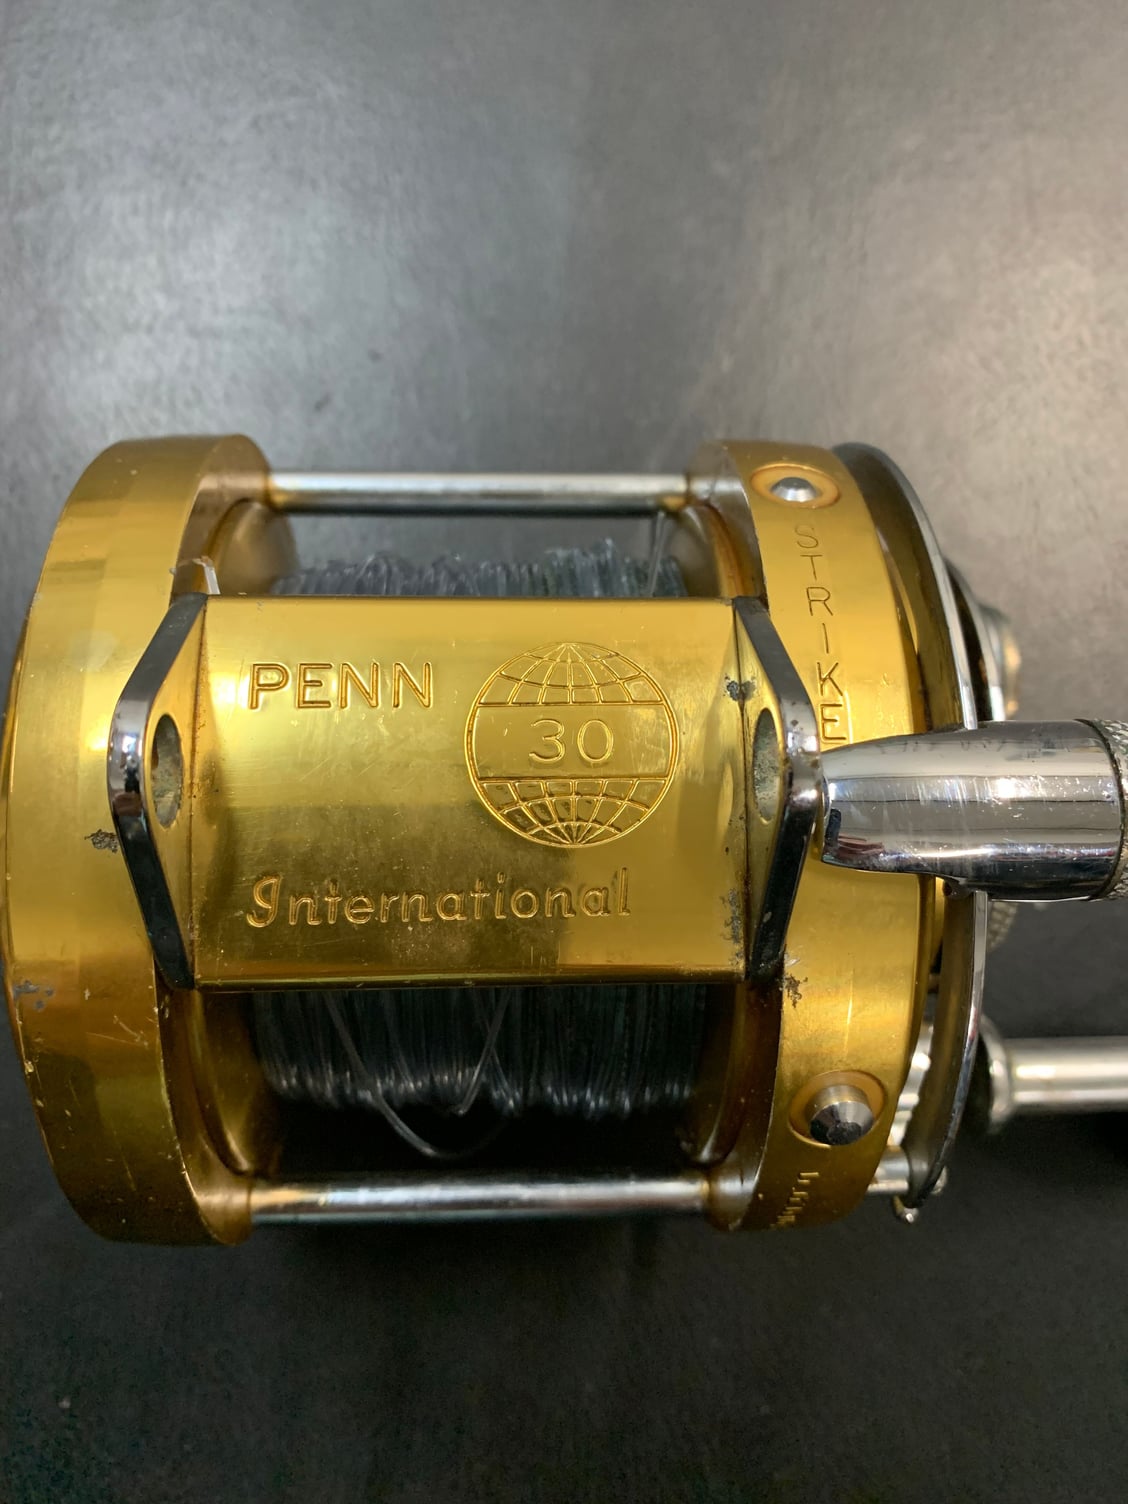 2 PENN international 30 reels - The Hull Truth - Boating and Fishing Forum